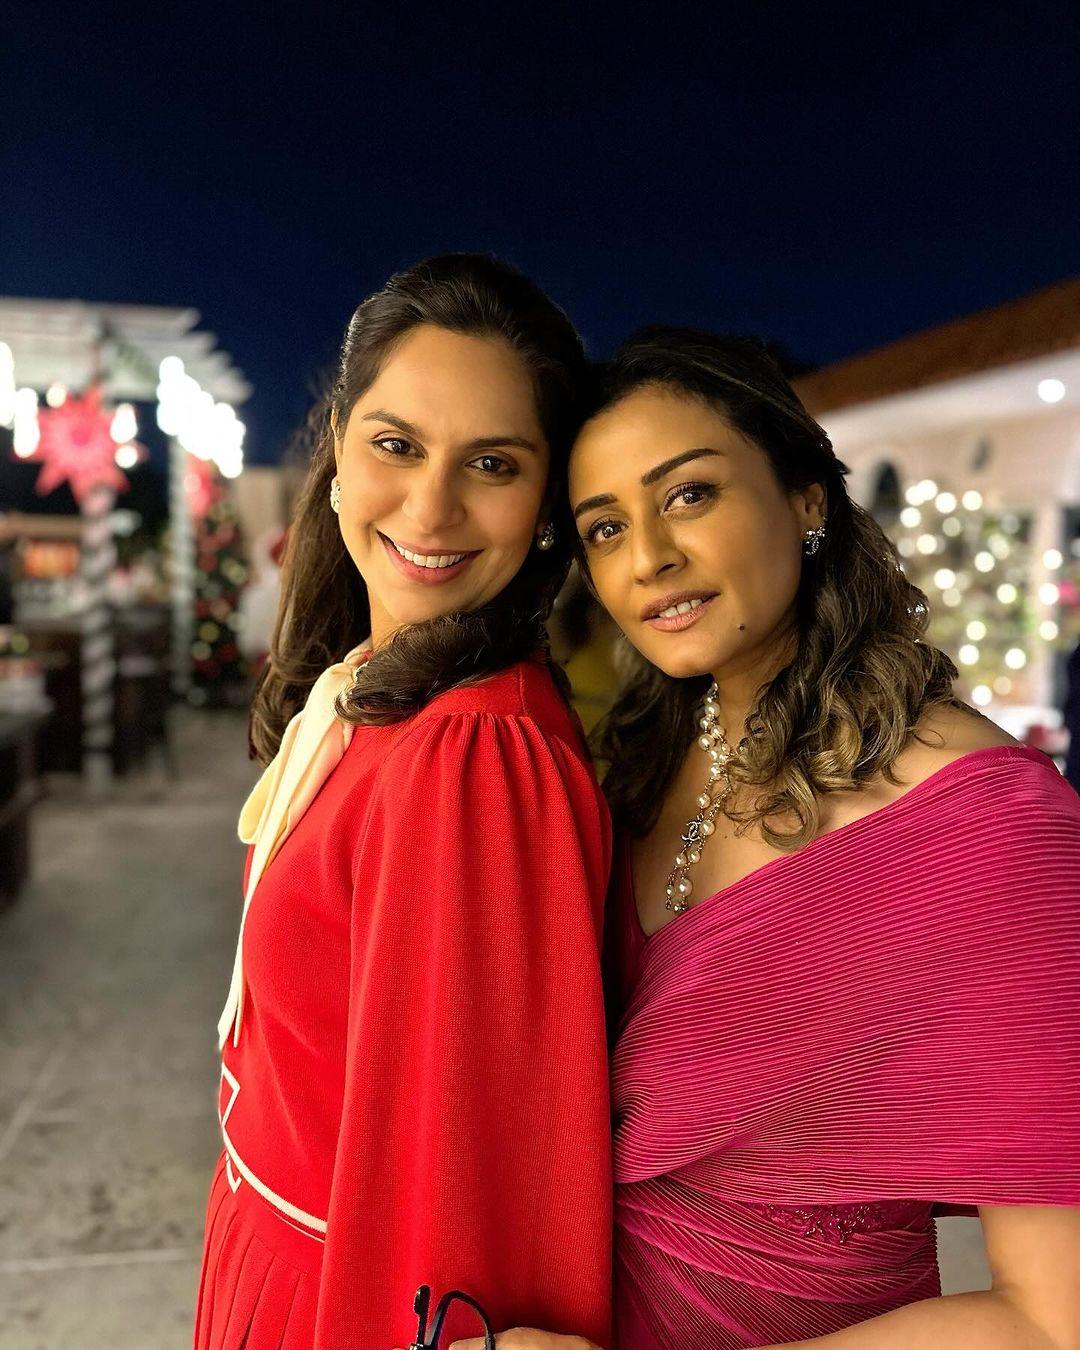 While Mahesh Babu could not attend the party, his wife and former actress Namrata was seen at the do spending quality time with friends. She is seen with Upasana Konidela here